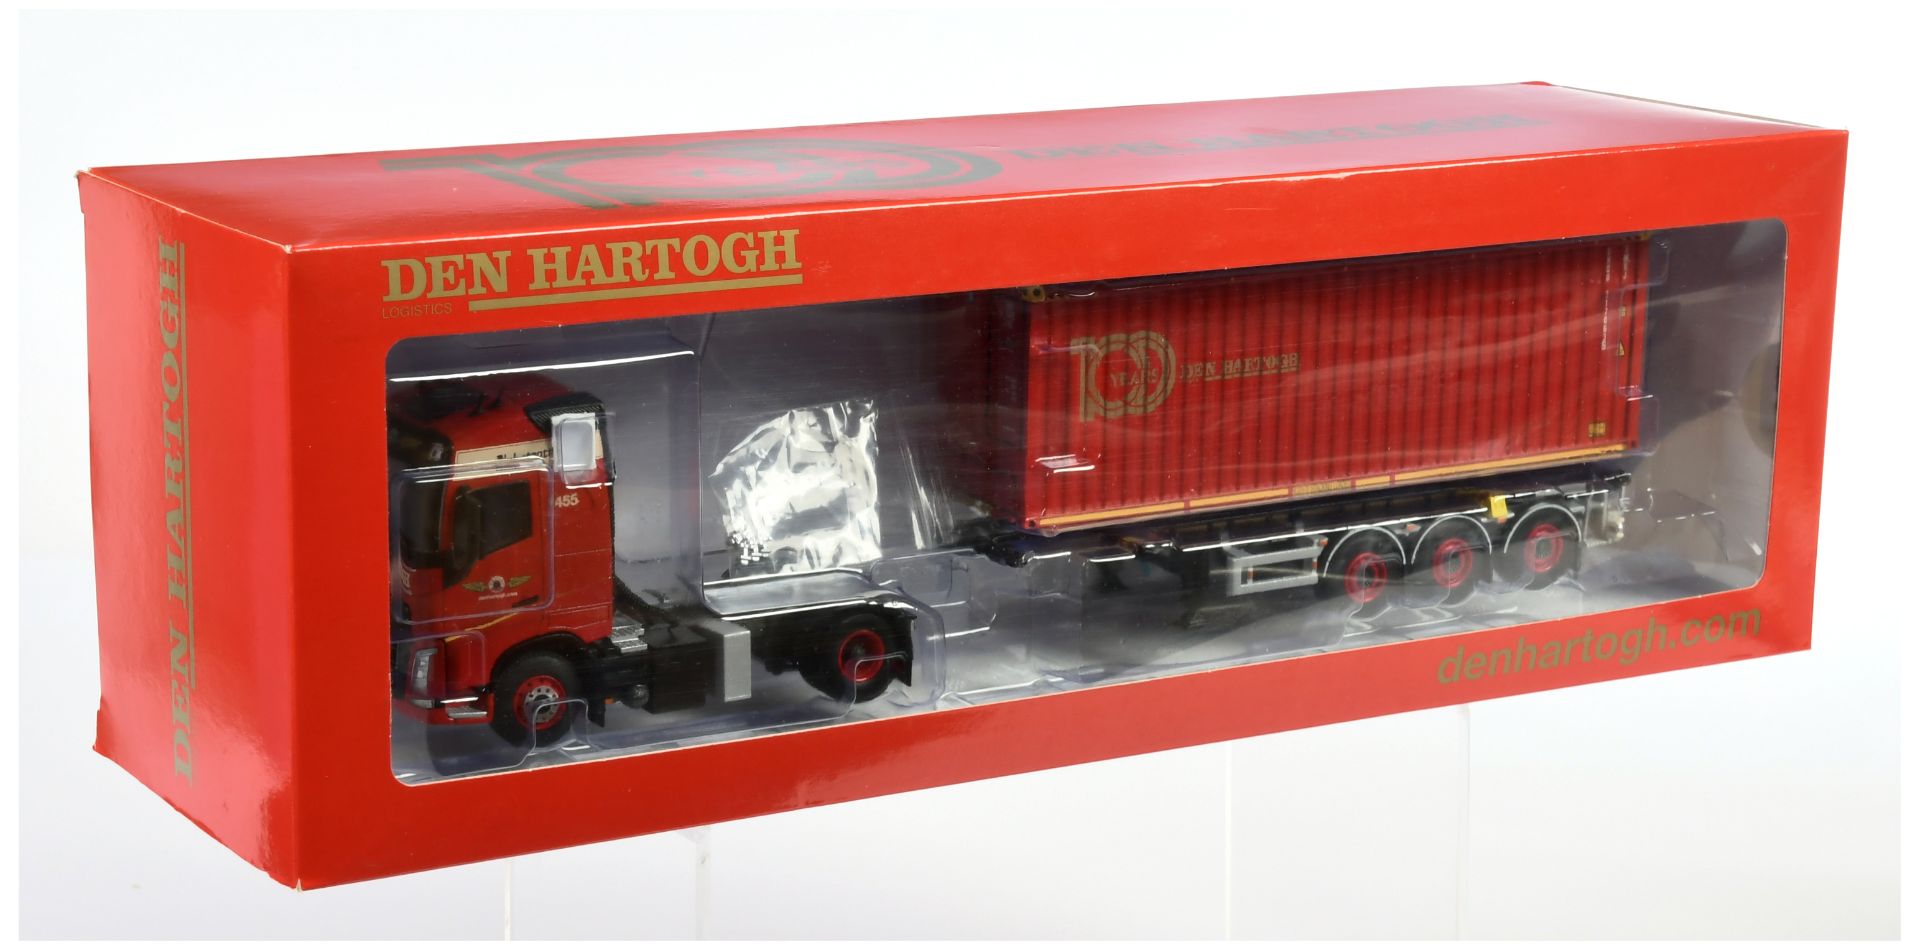 WSI Models Volvo 1:50 scale 100 years Den Hartogh articulated truck and trailer